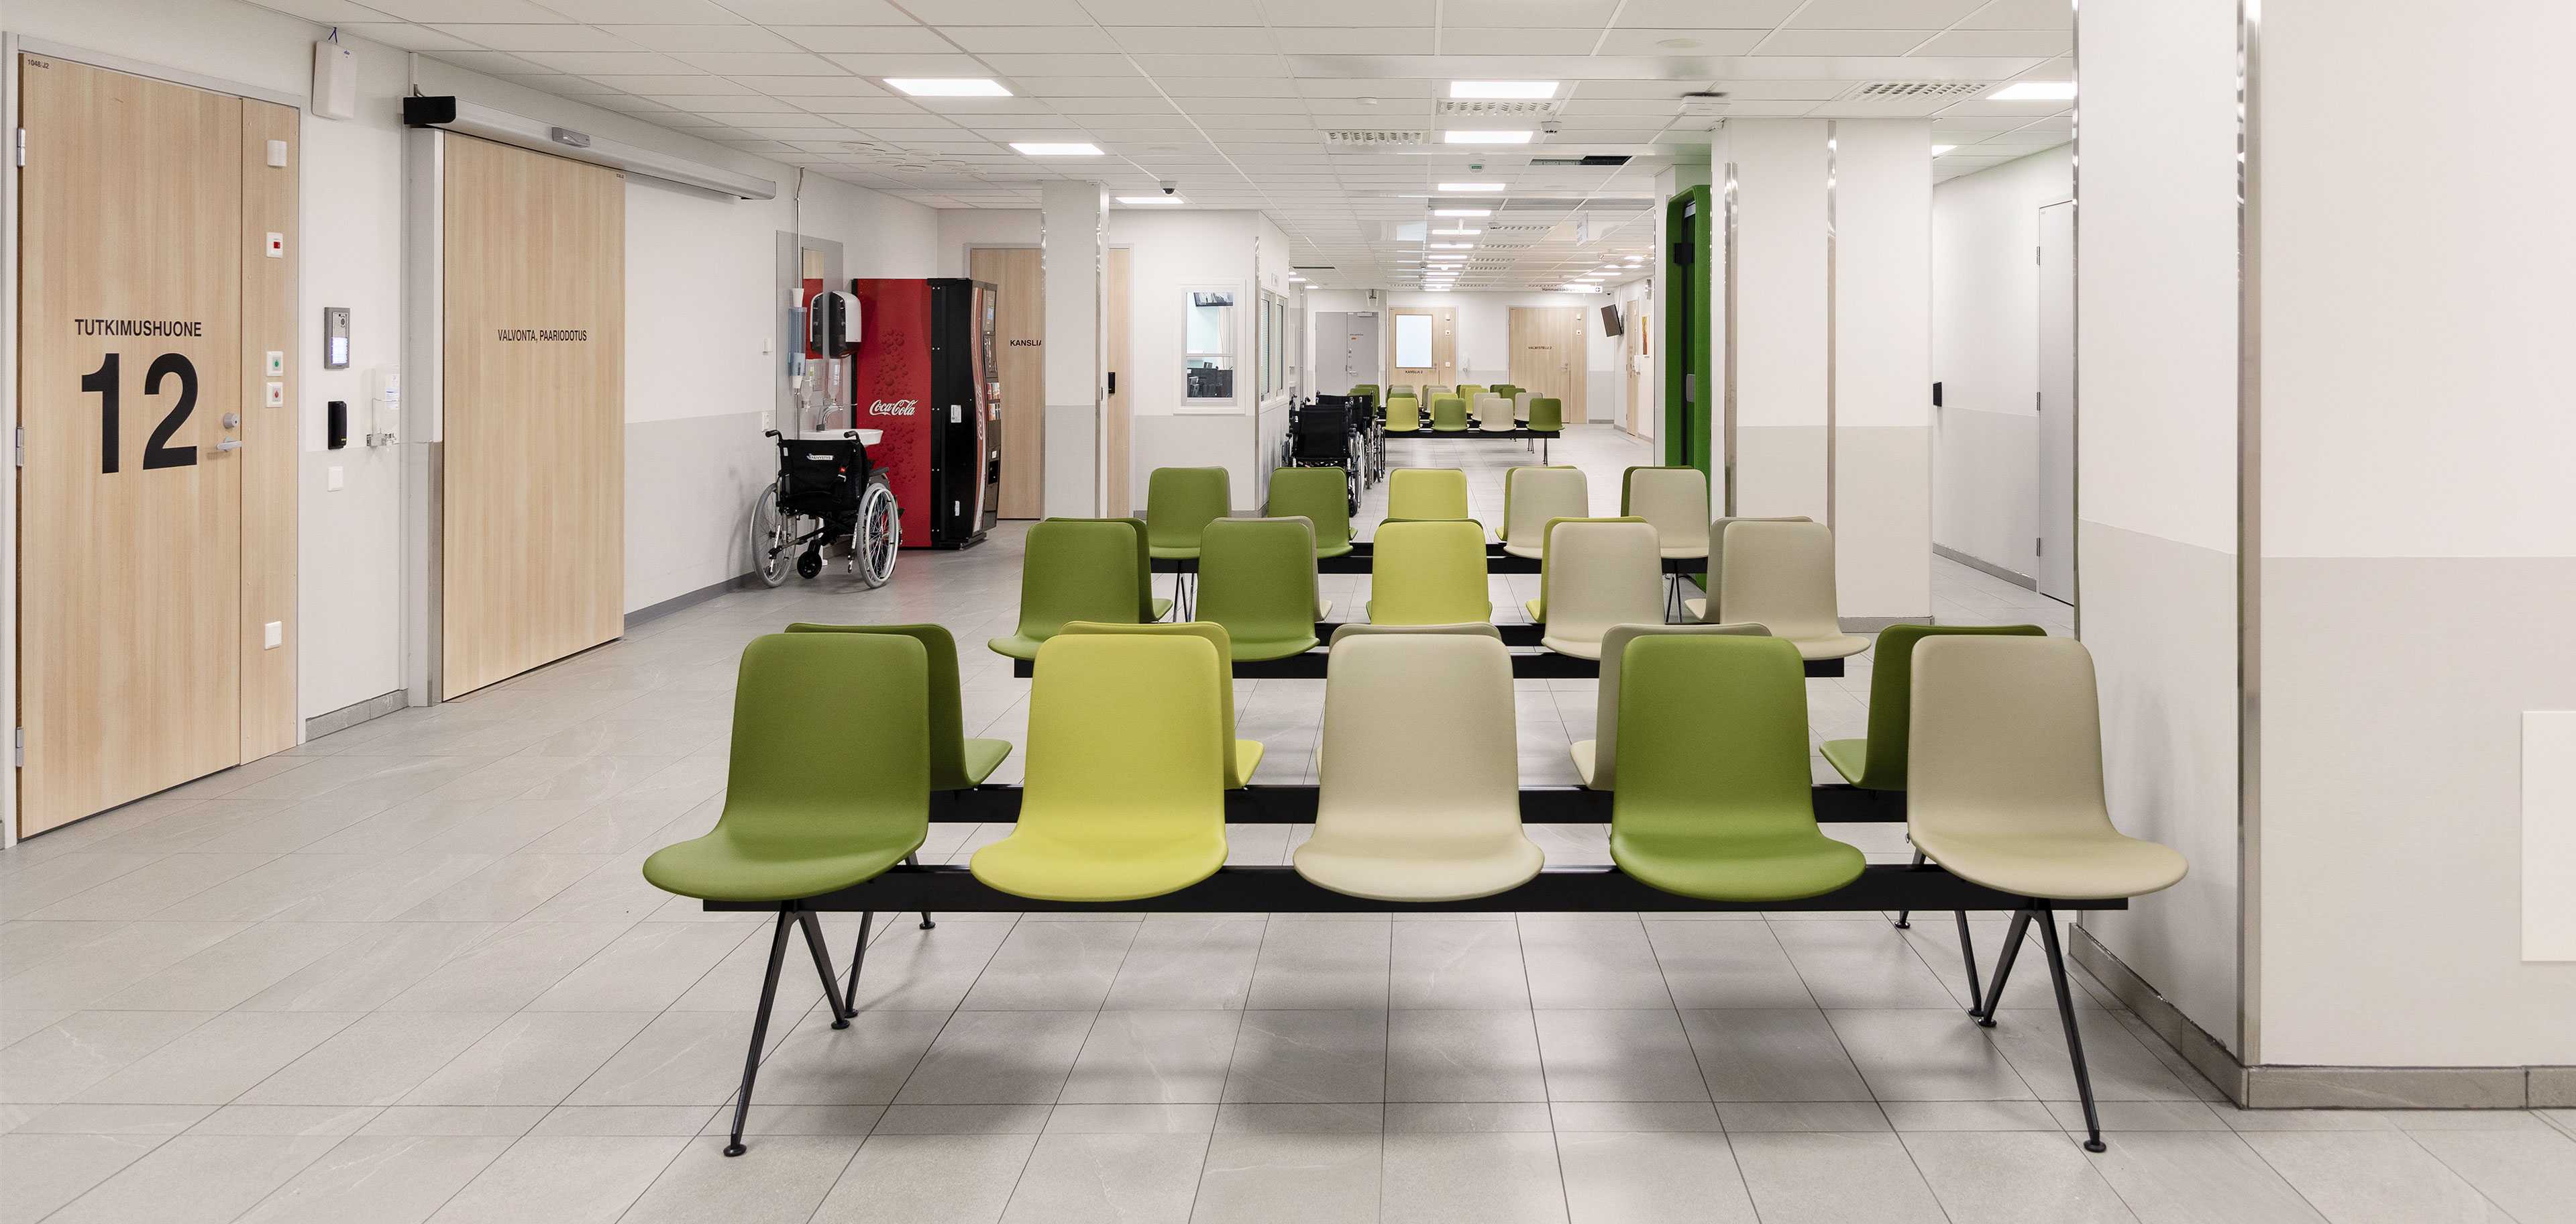 Sola beam chairs in the waiting area of the North Karelia Central Hospital